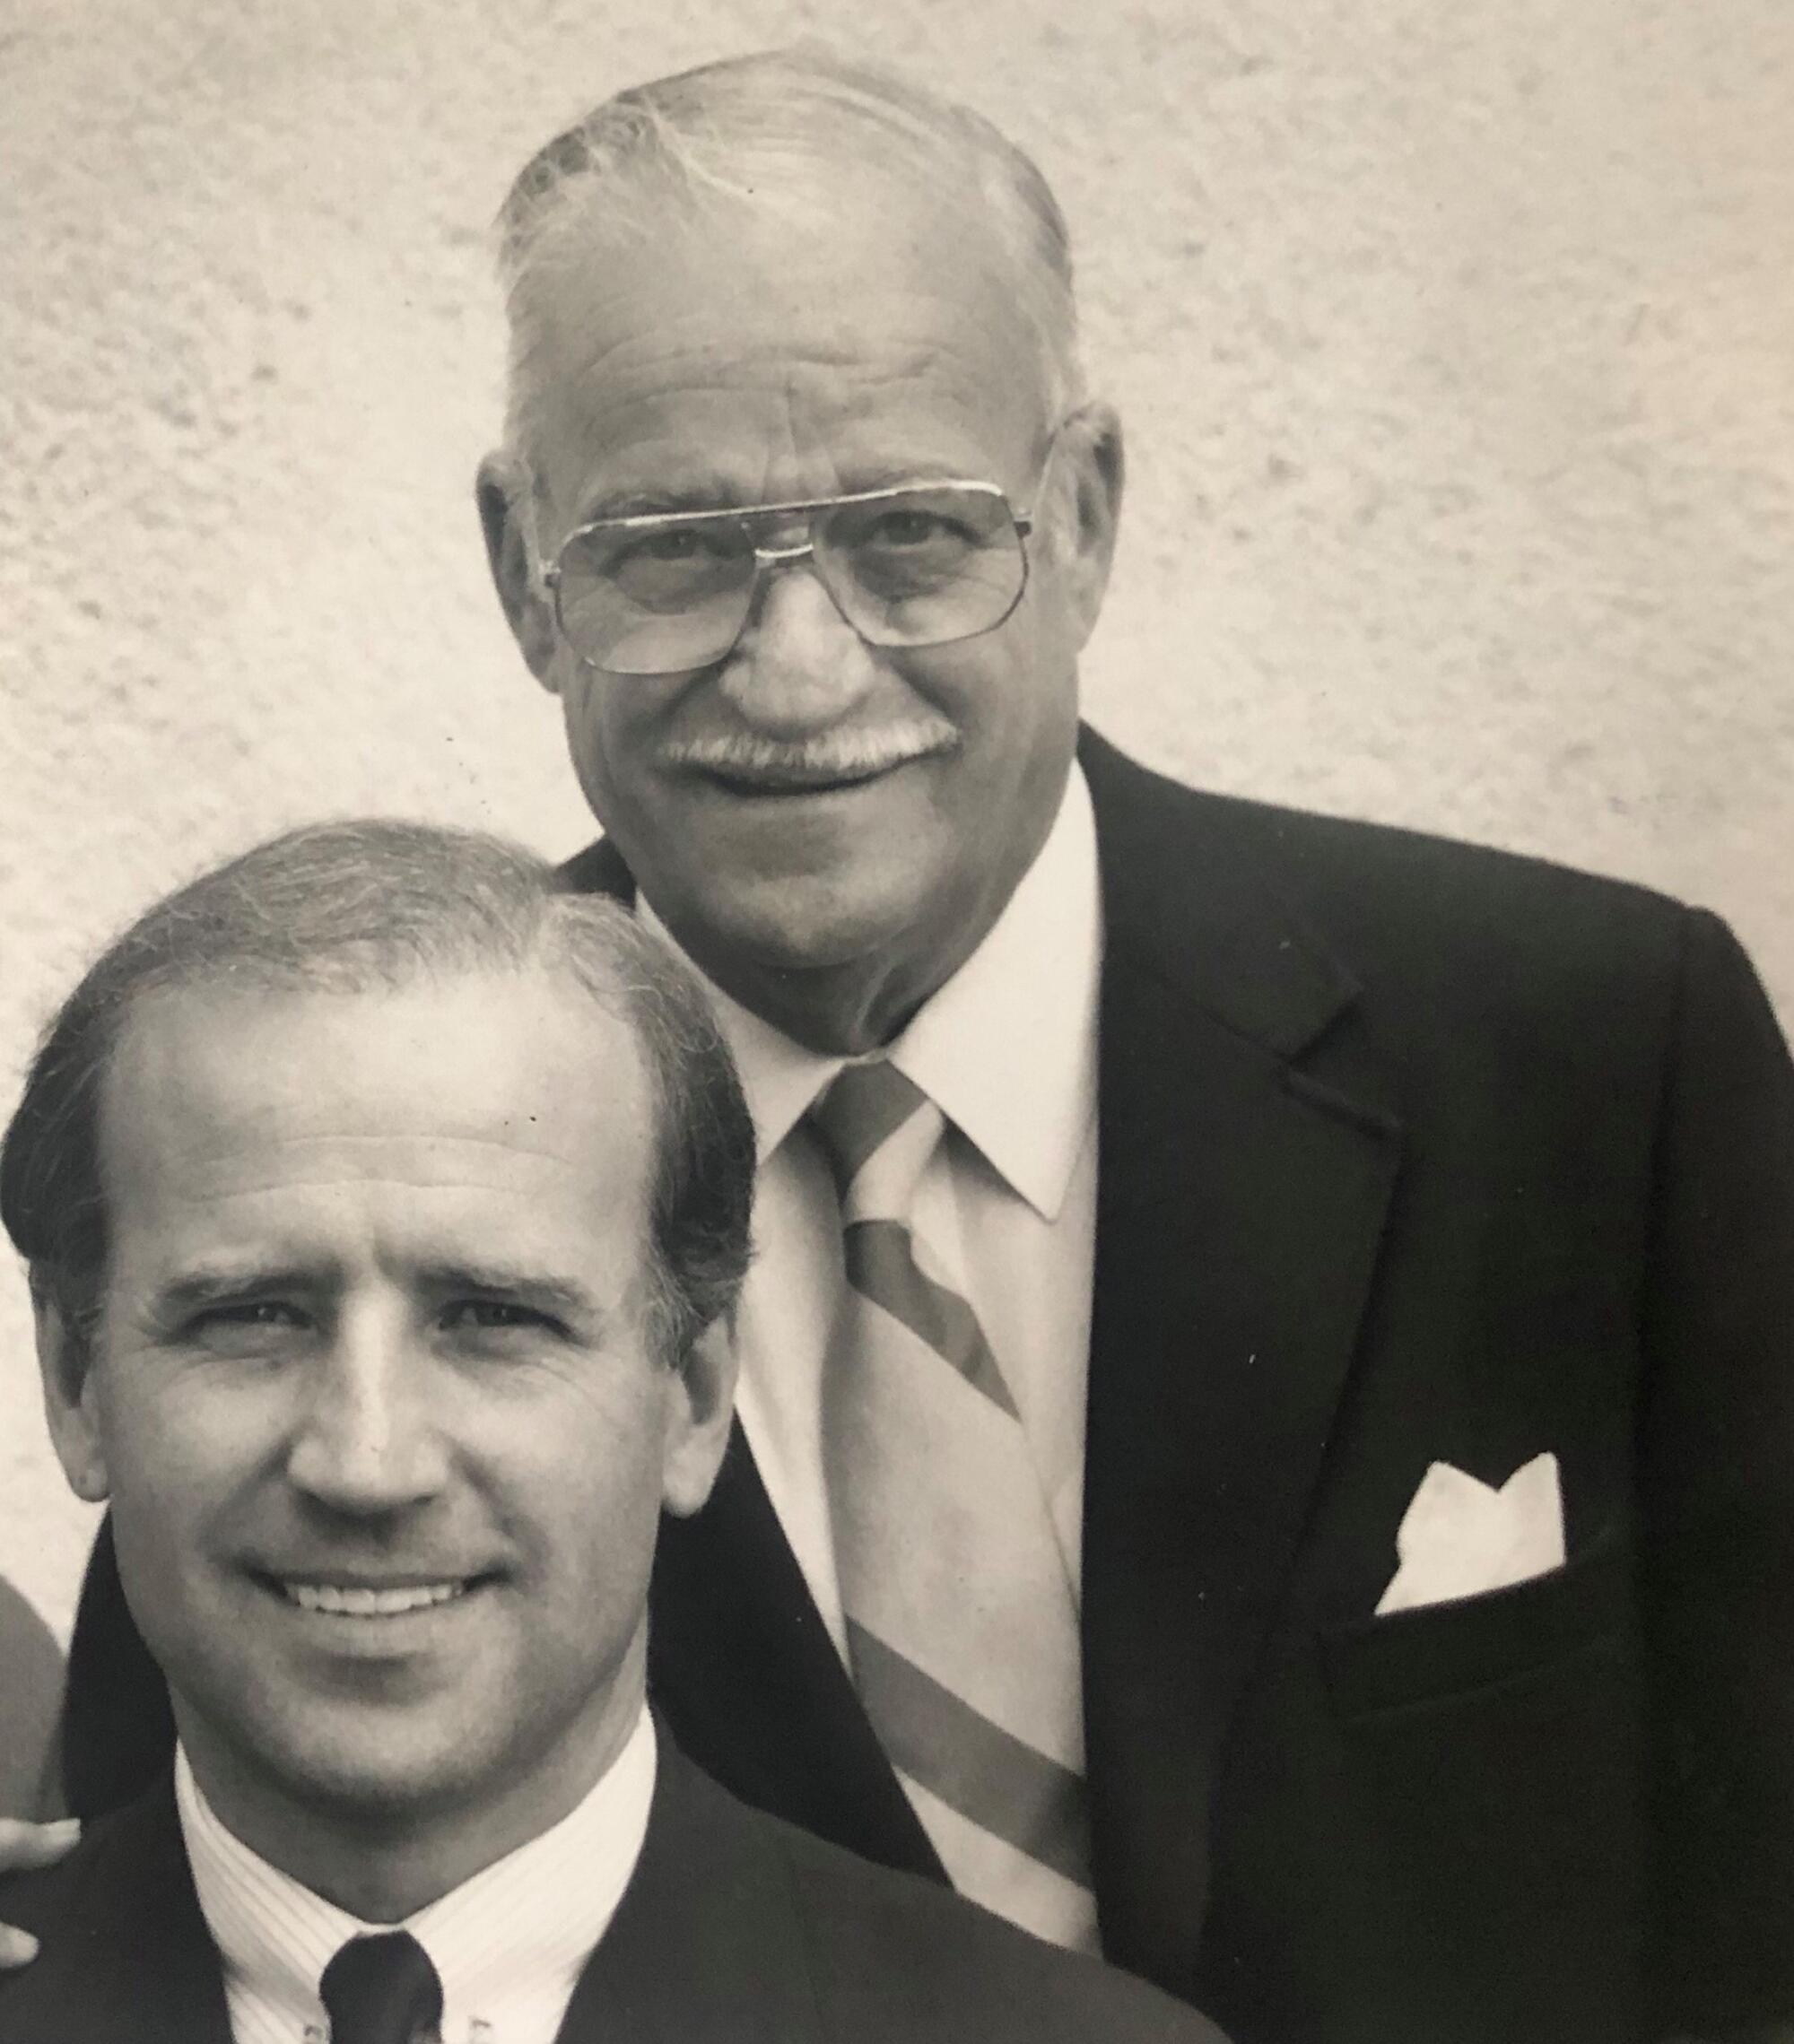 A man in suit and tie with another, older man, both in suit and tie and smiling